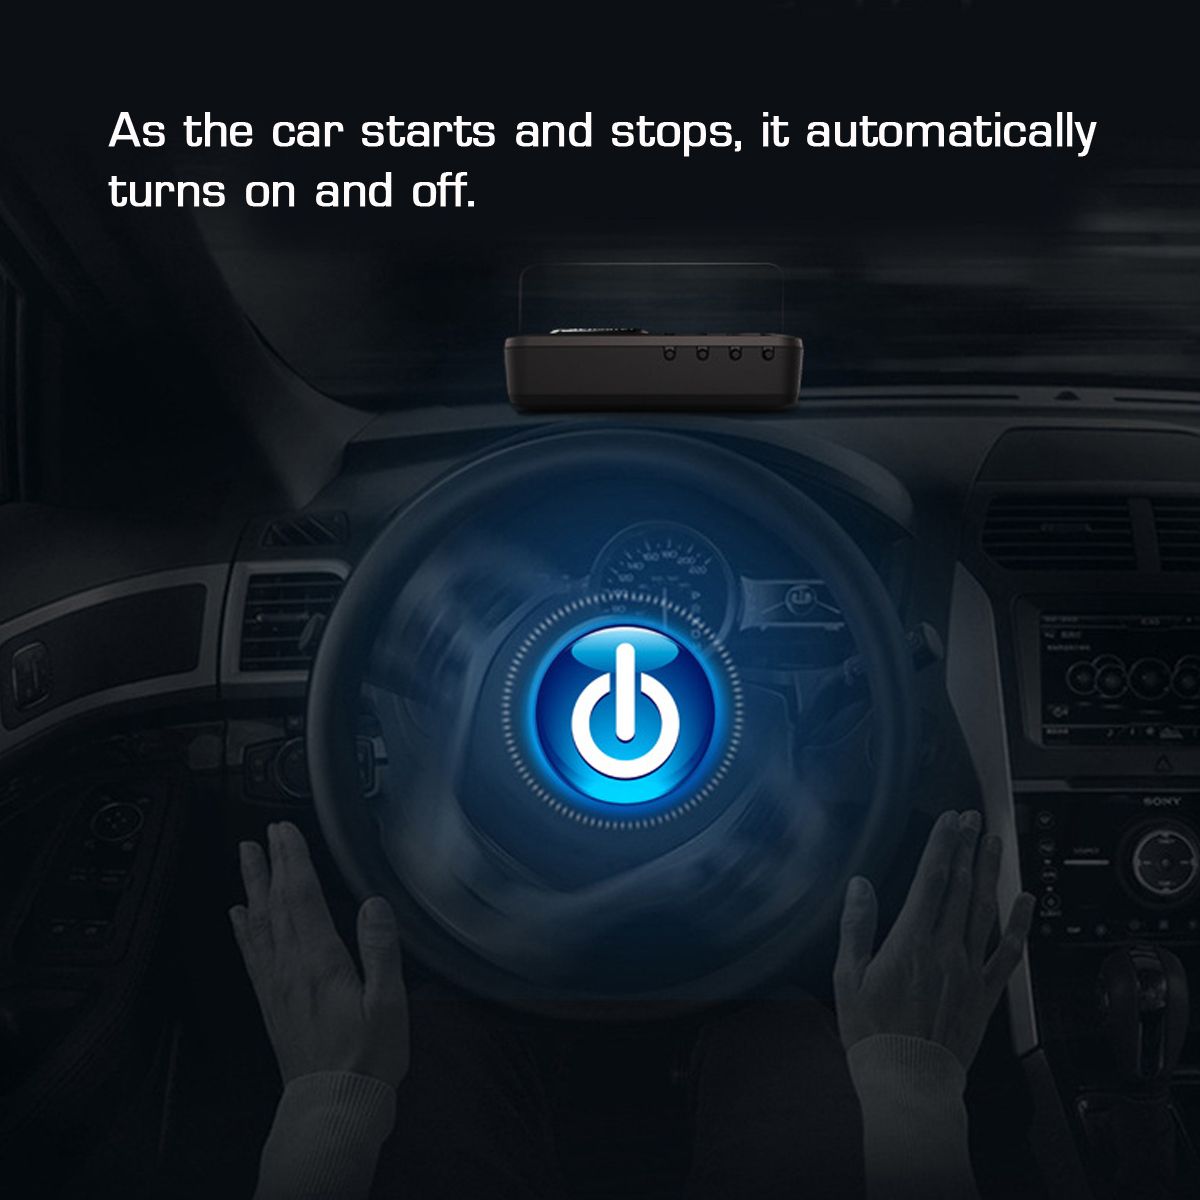 Car-HUD-OBD-Automobile-Refitting-Multi-functional-Head-Up-Display-Speed-Water-Temperature-Voltage-St-1654663